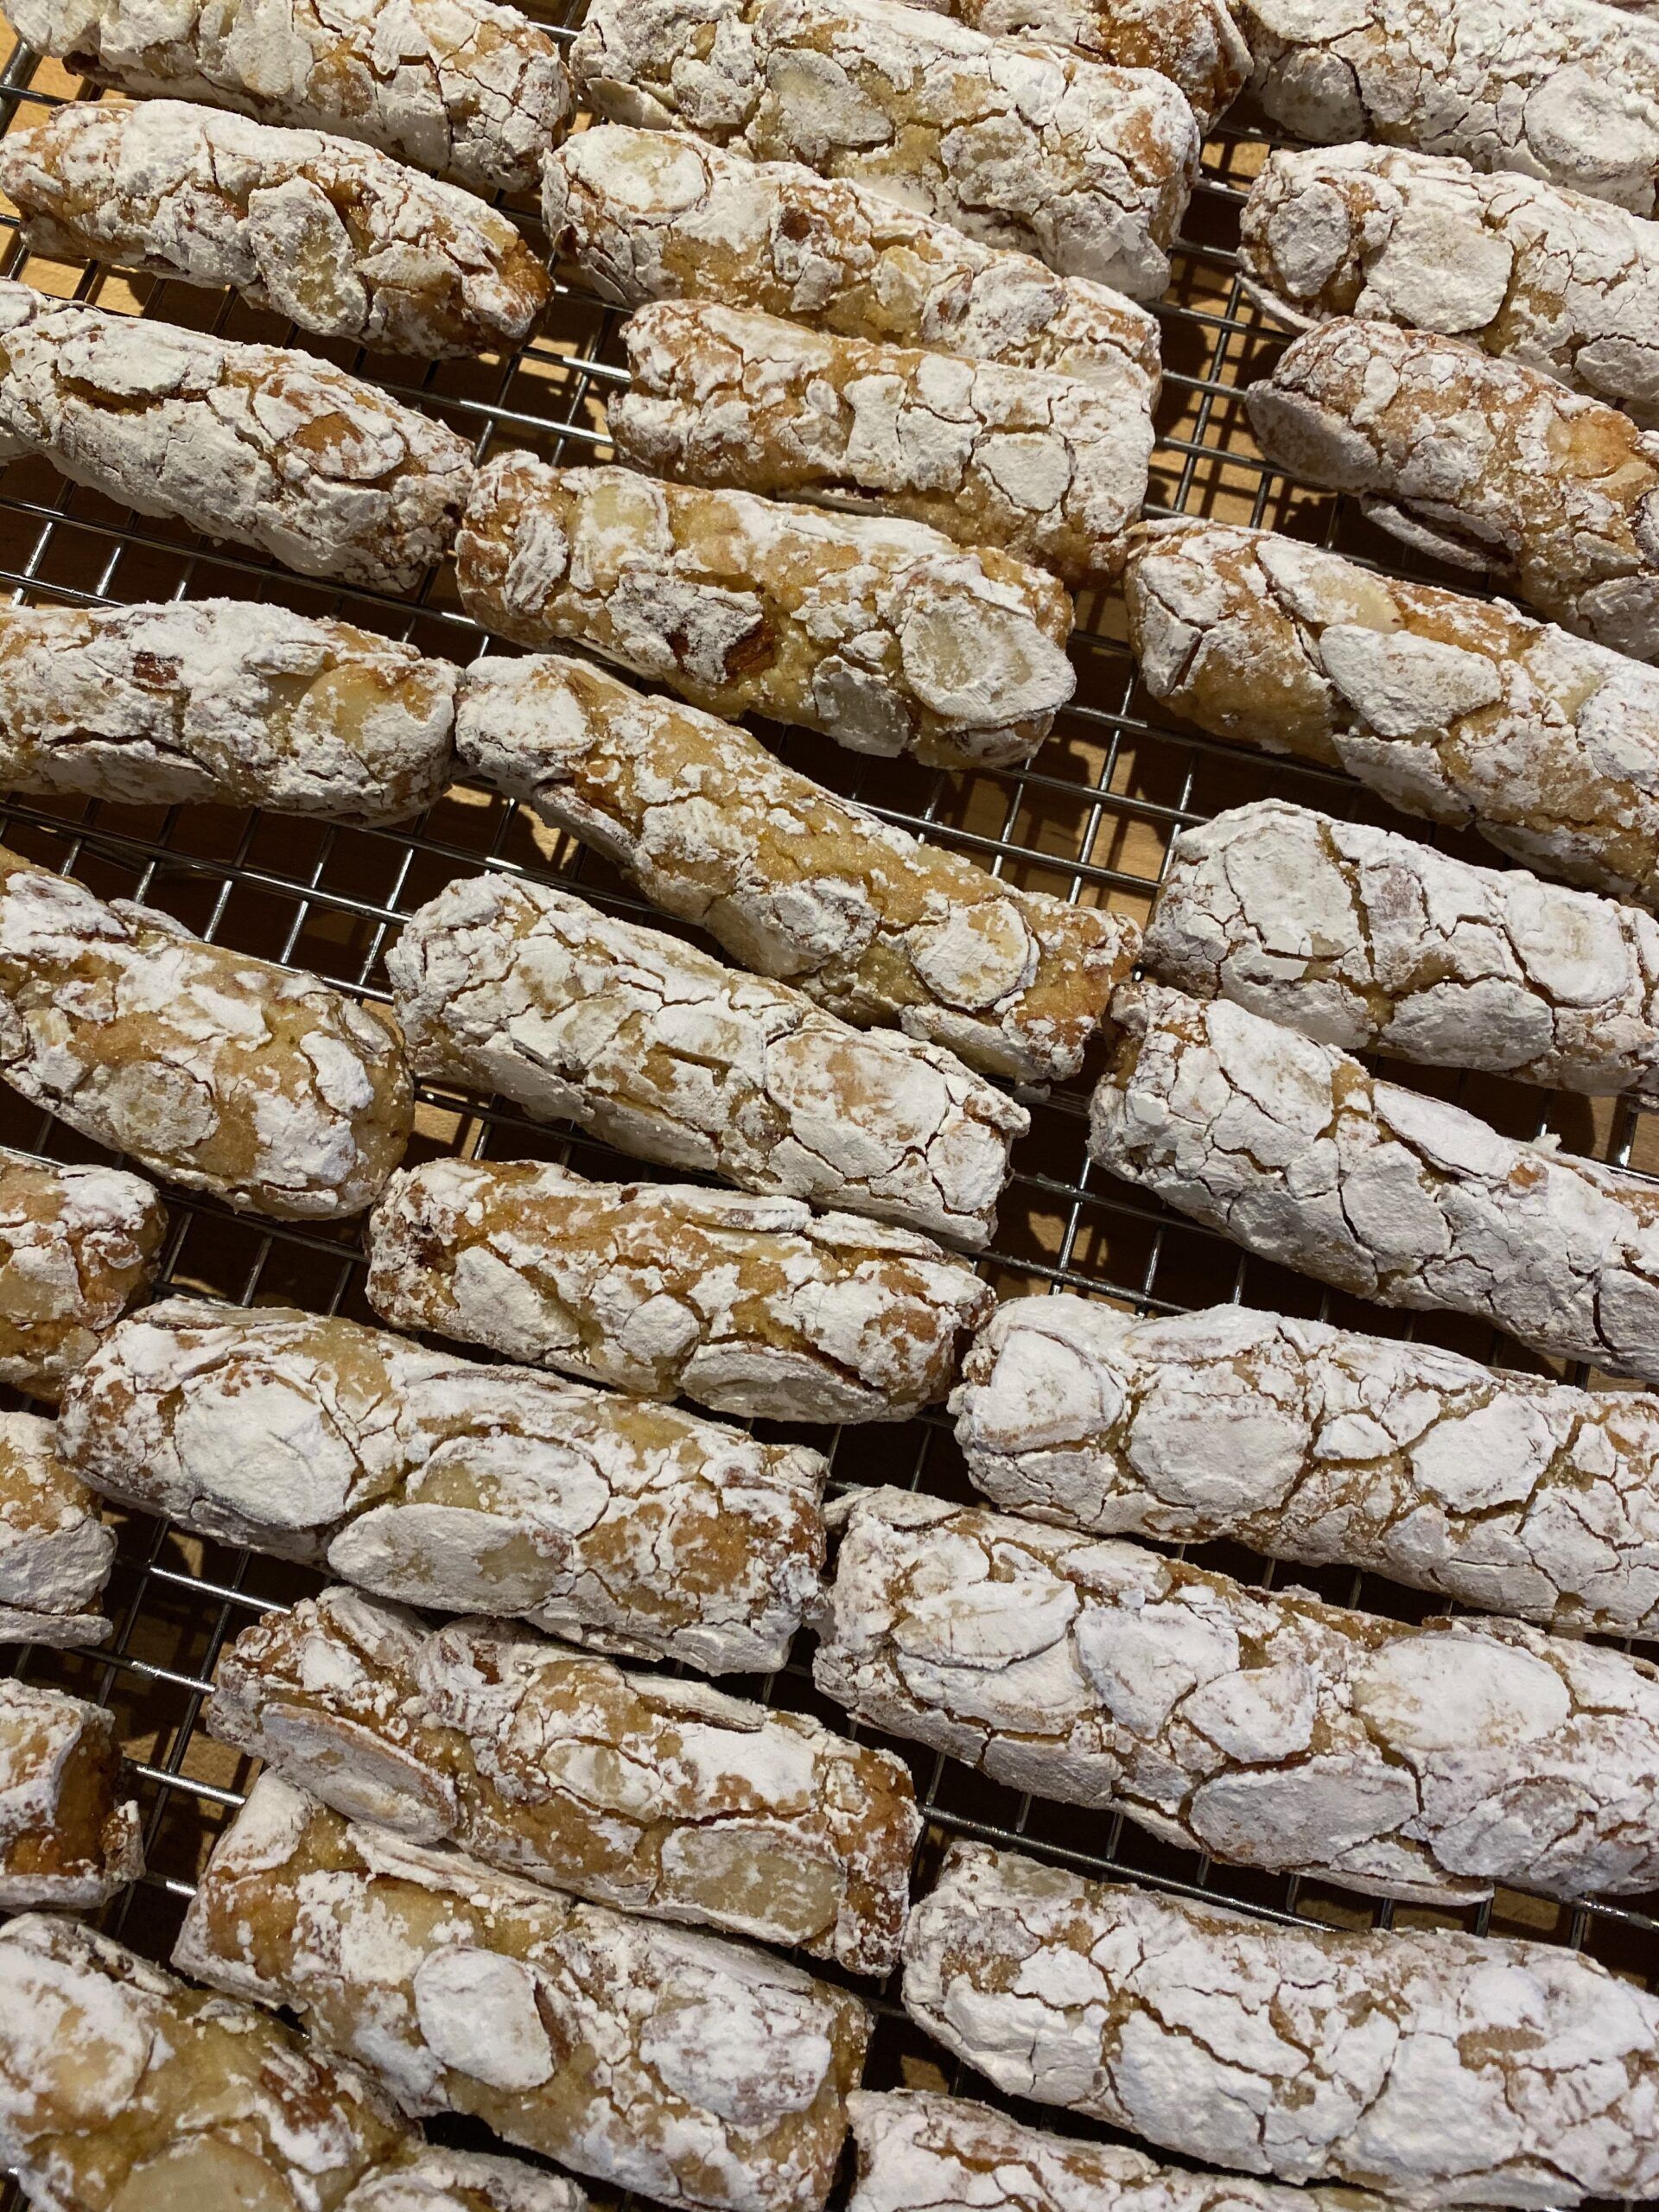 Small, oblong, cylinder shaped cookies, covered in flaked almonds and powdered sugar, sit on a metal cooling rack.